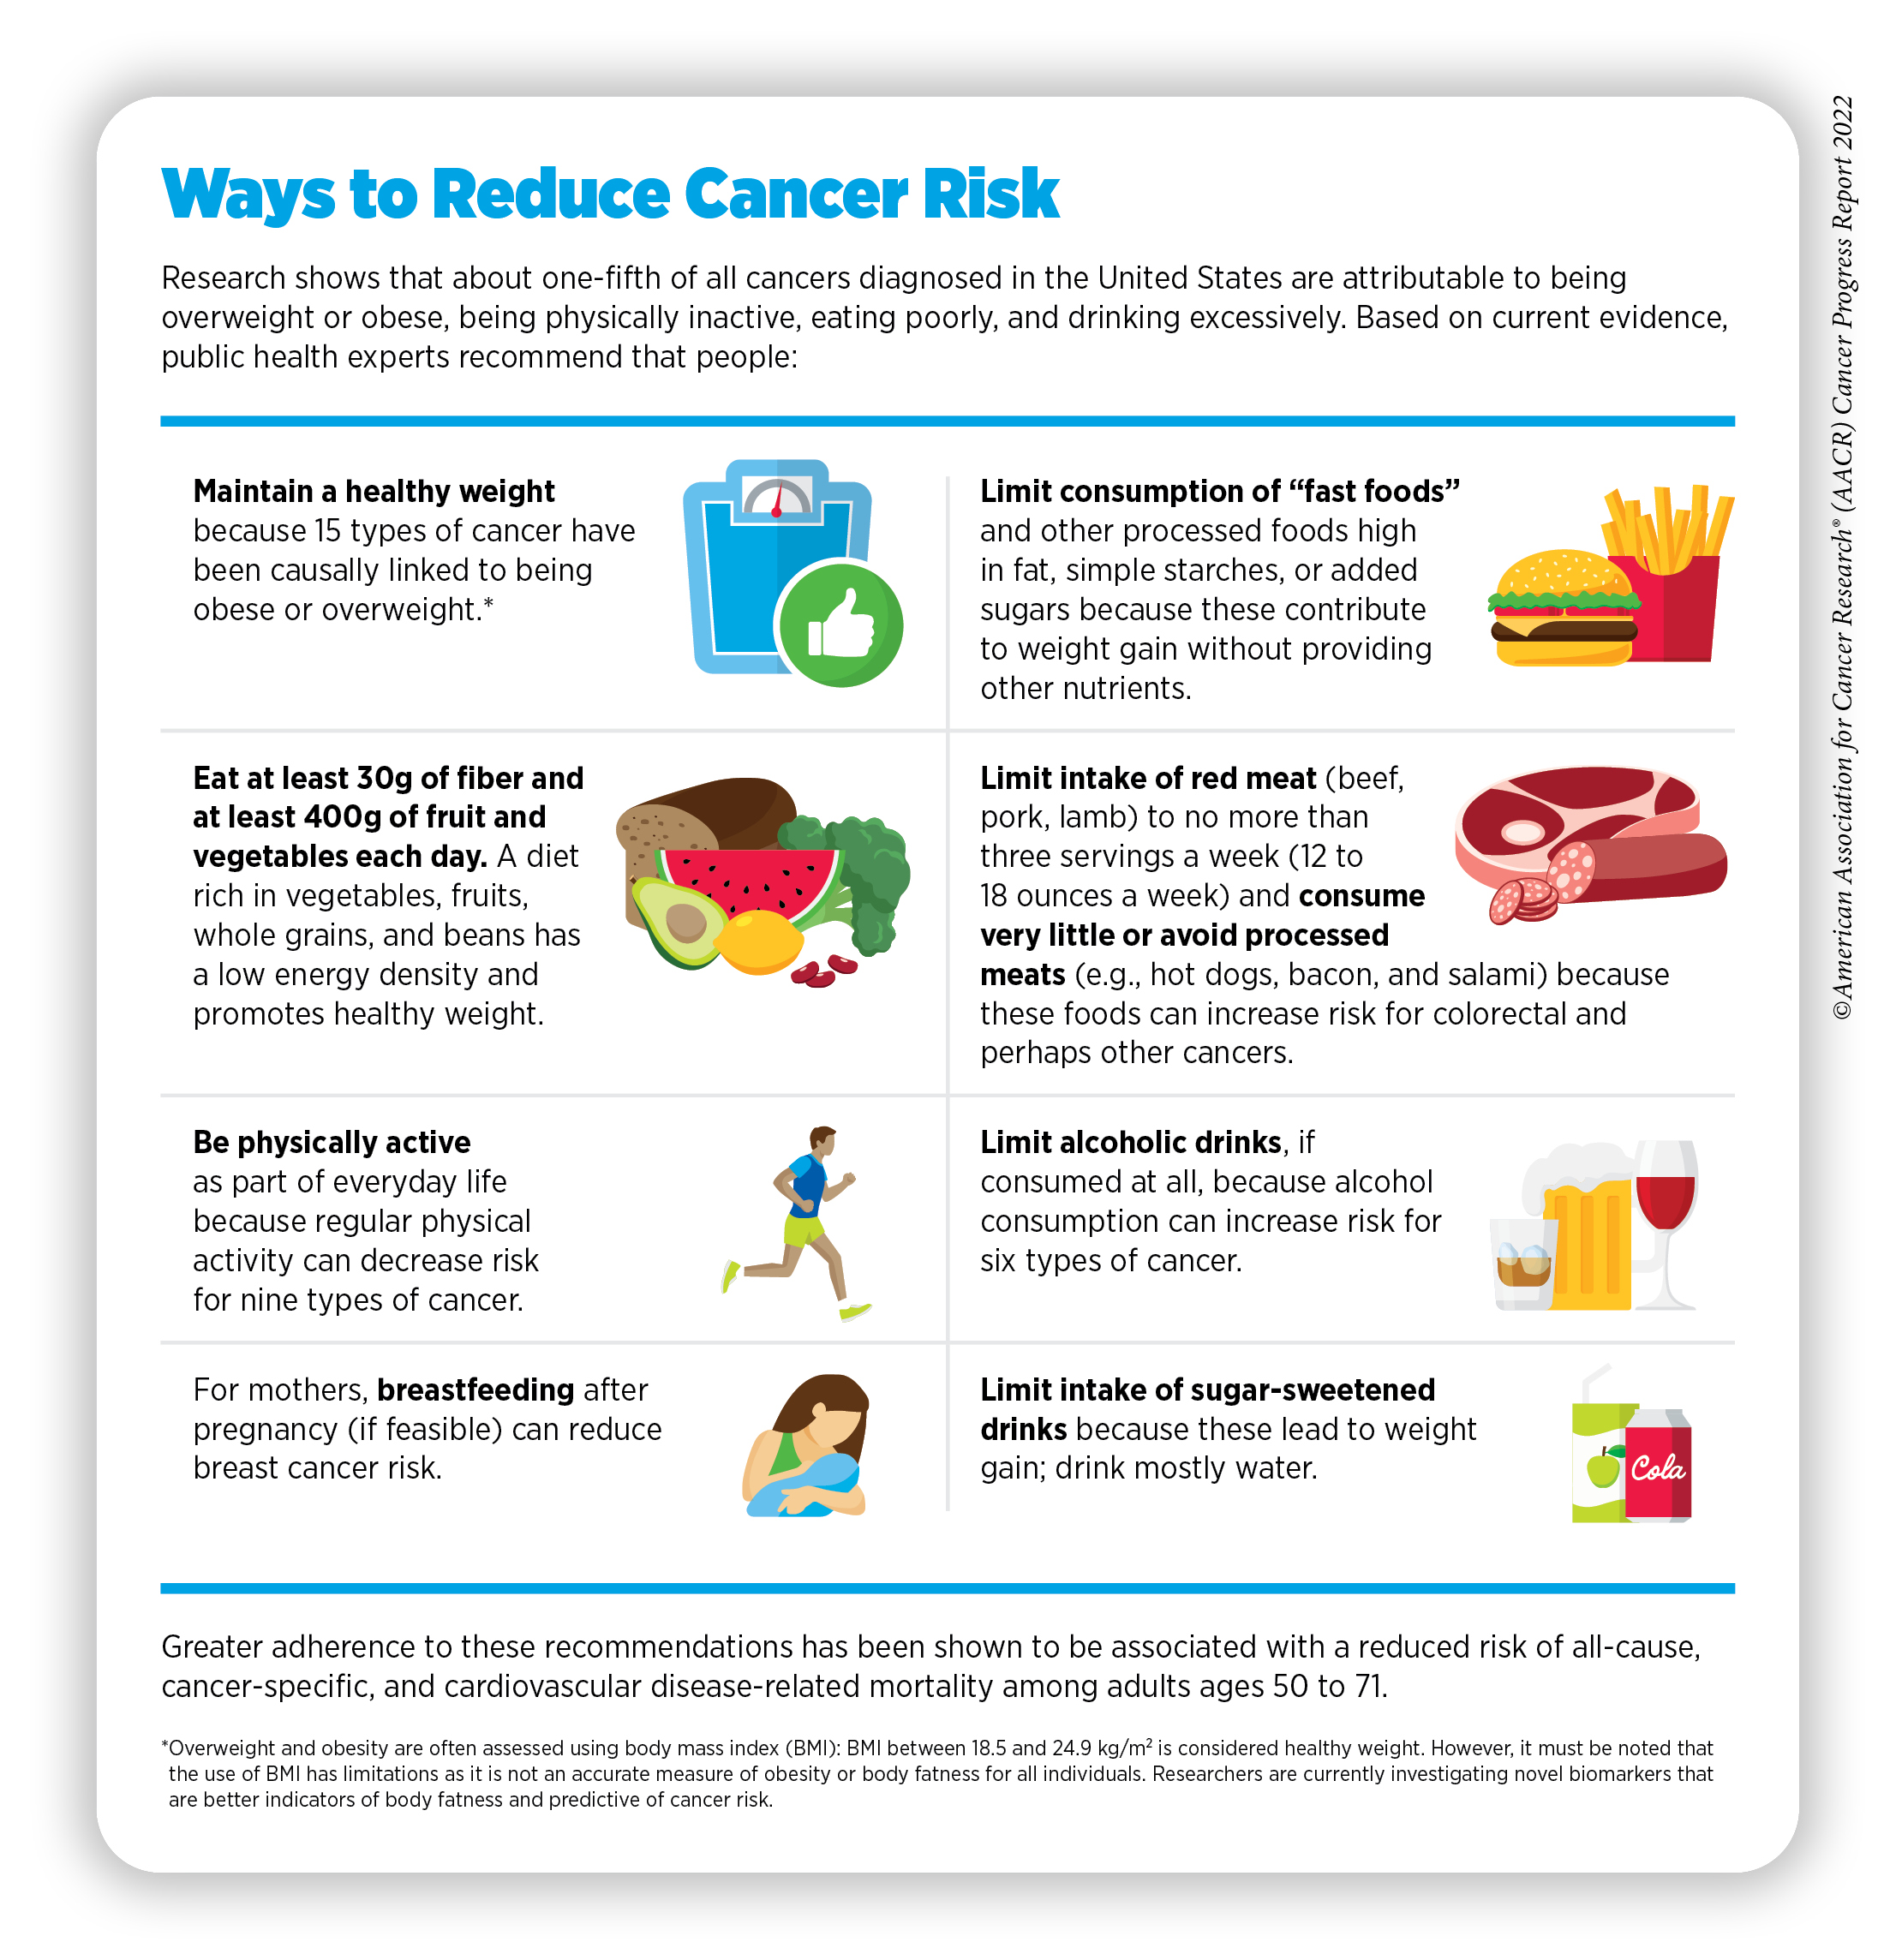 Stress reduction for cancer prevention